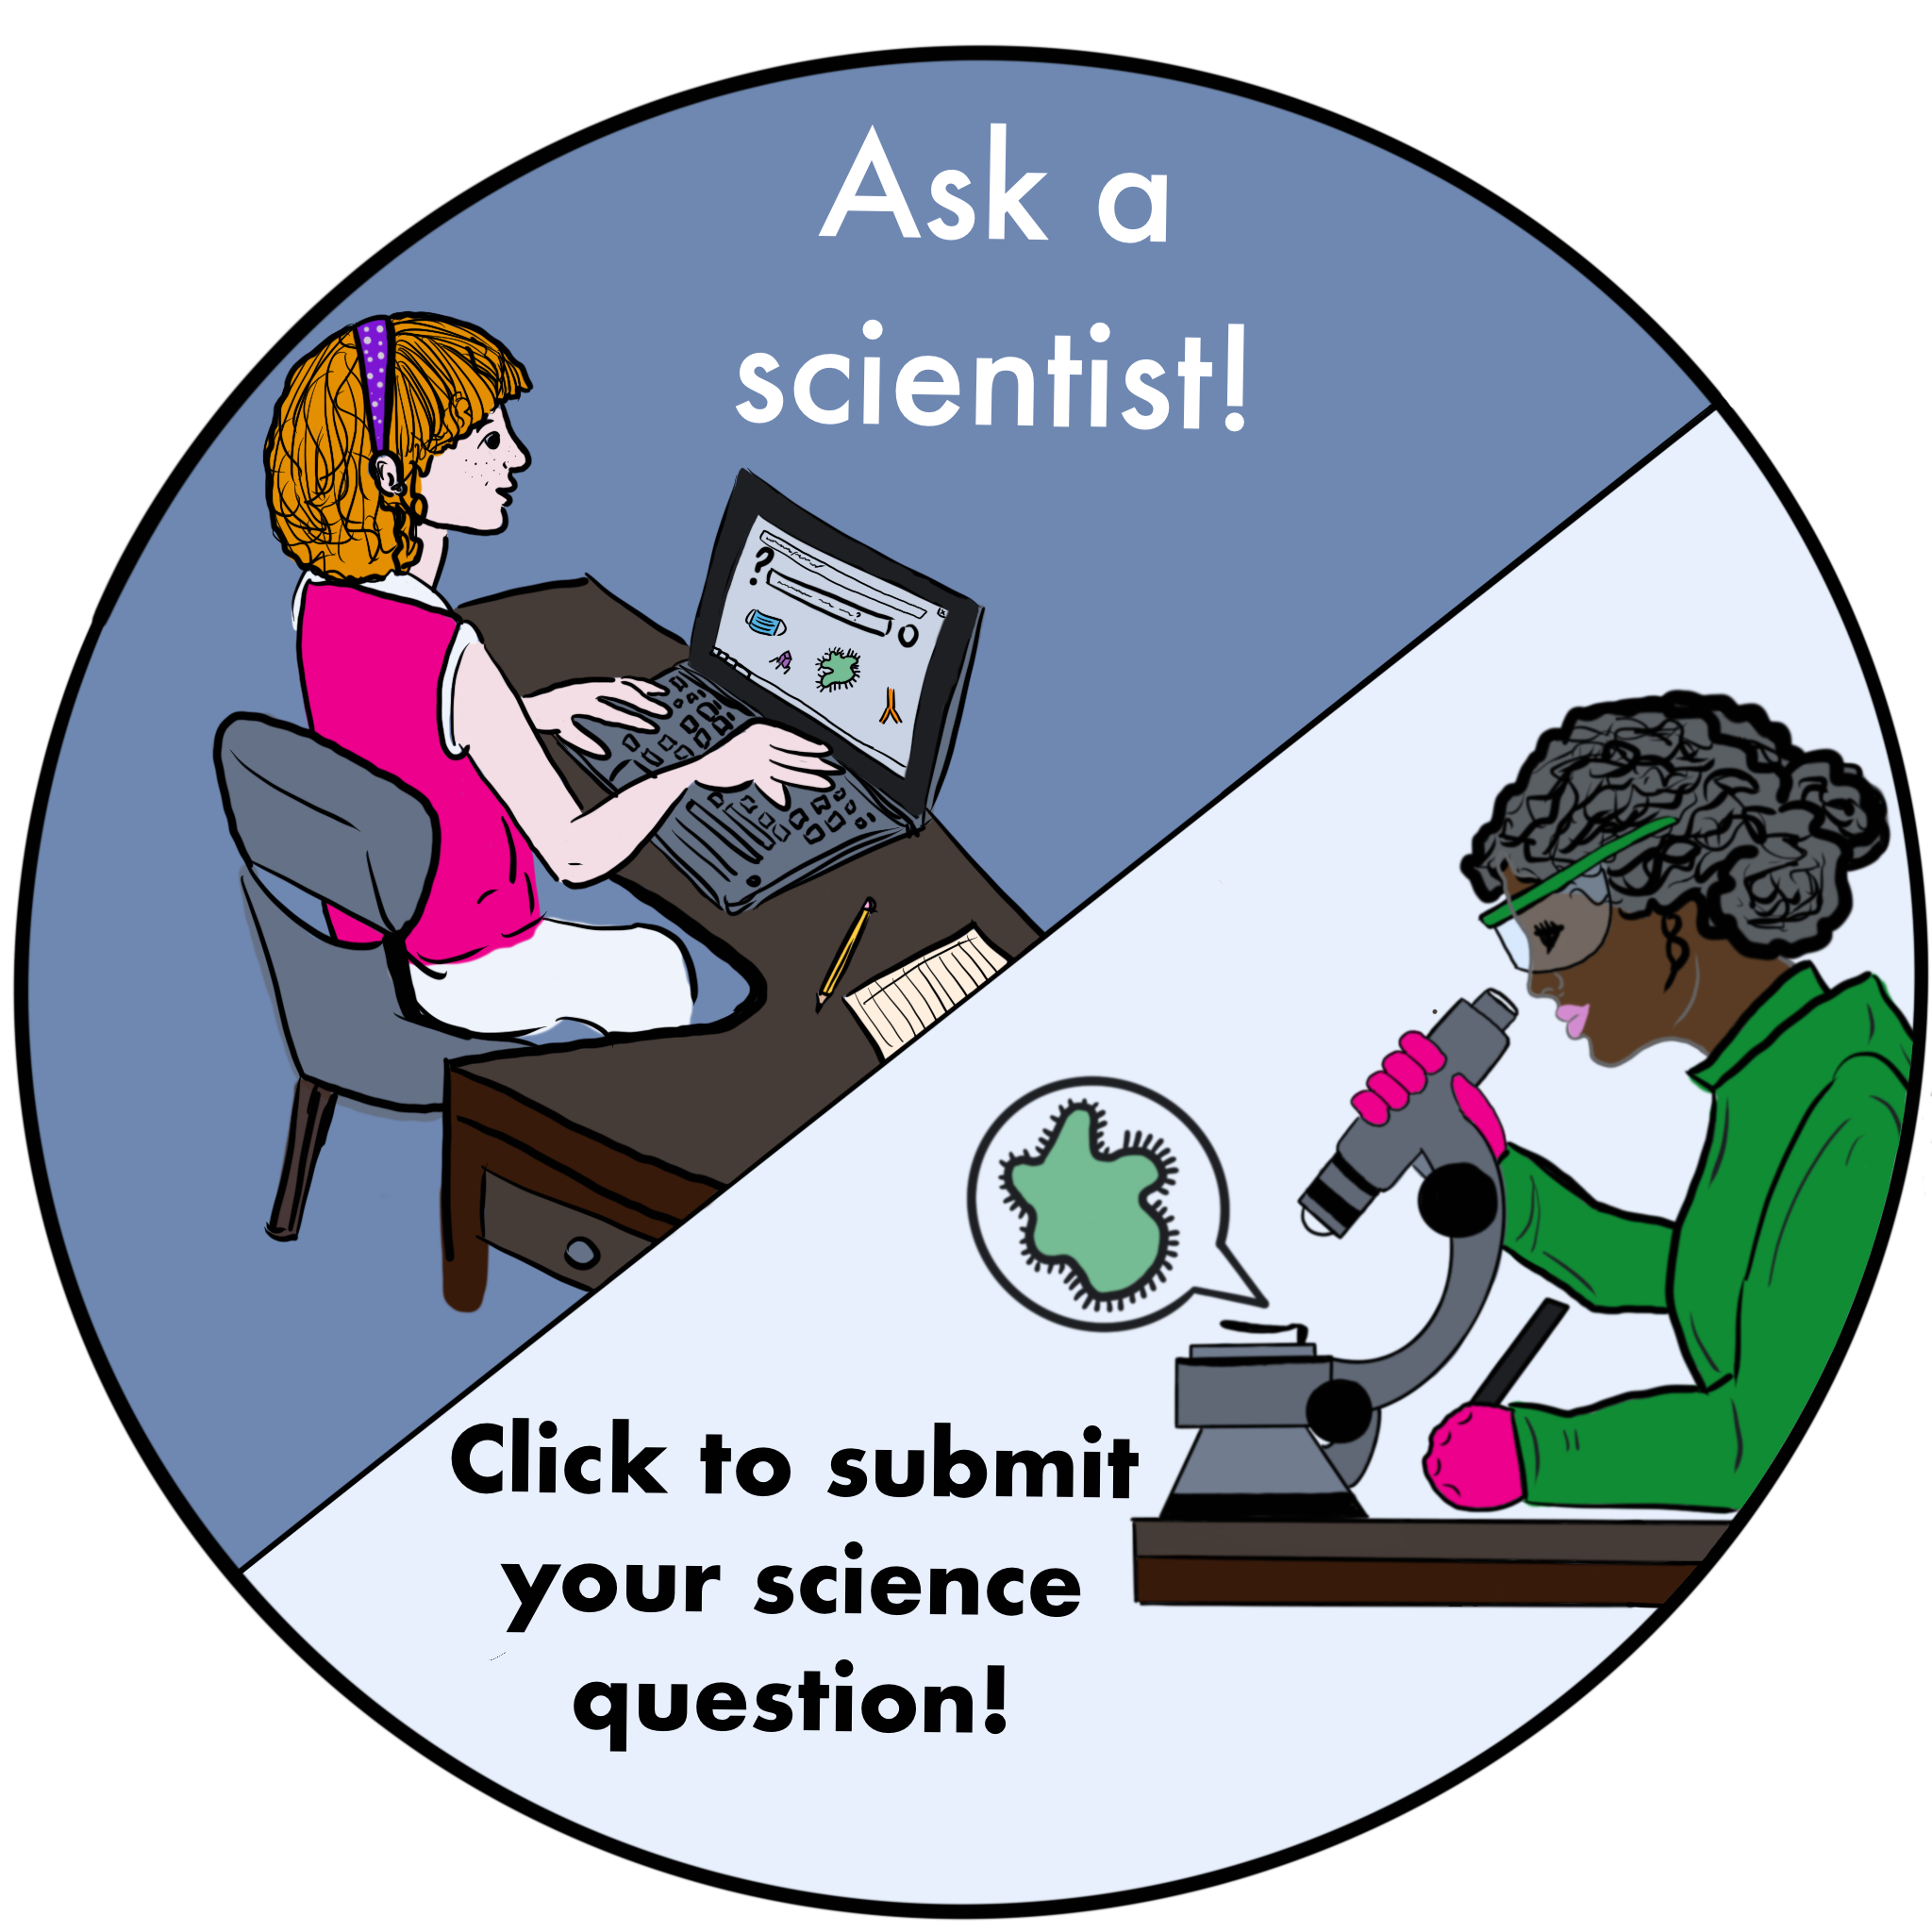 Ask a Scientist